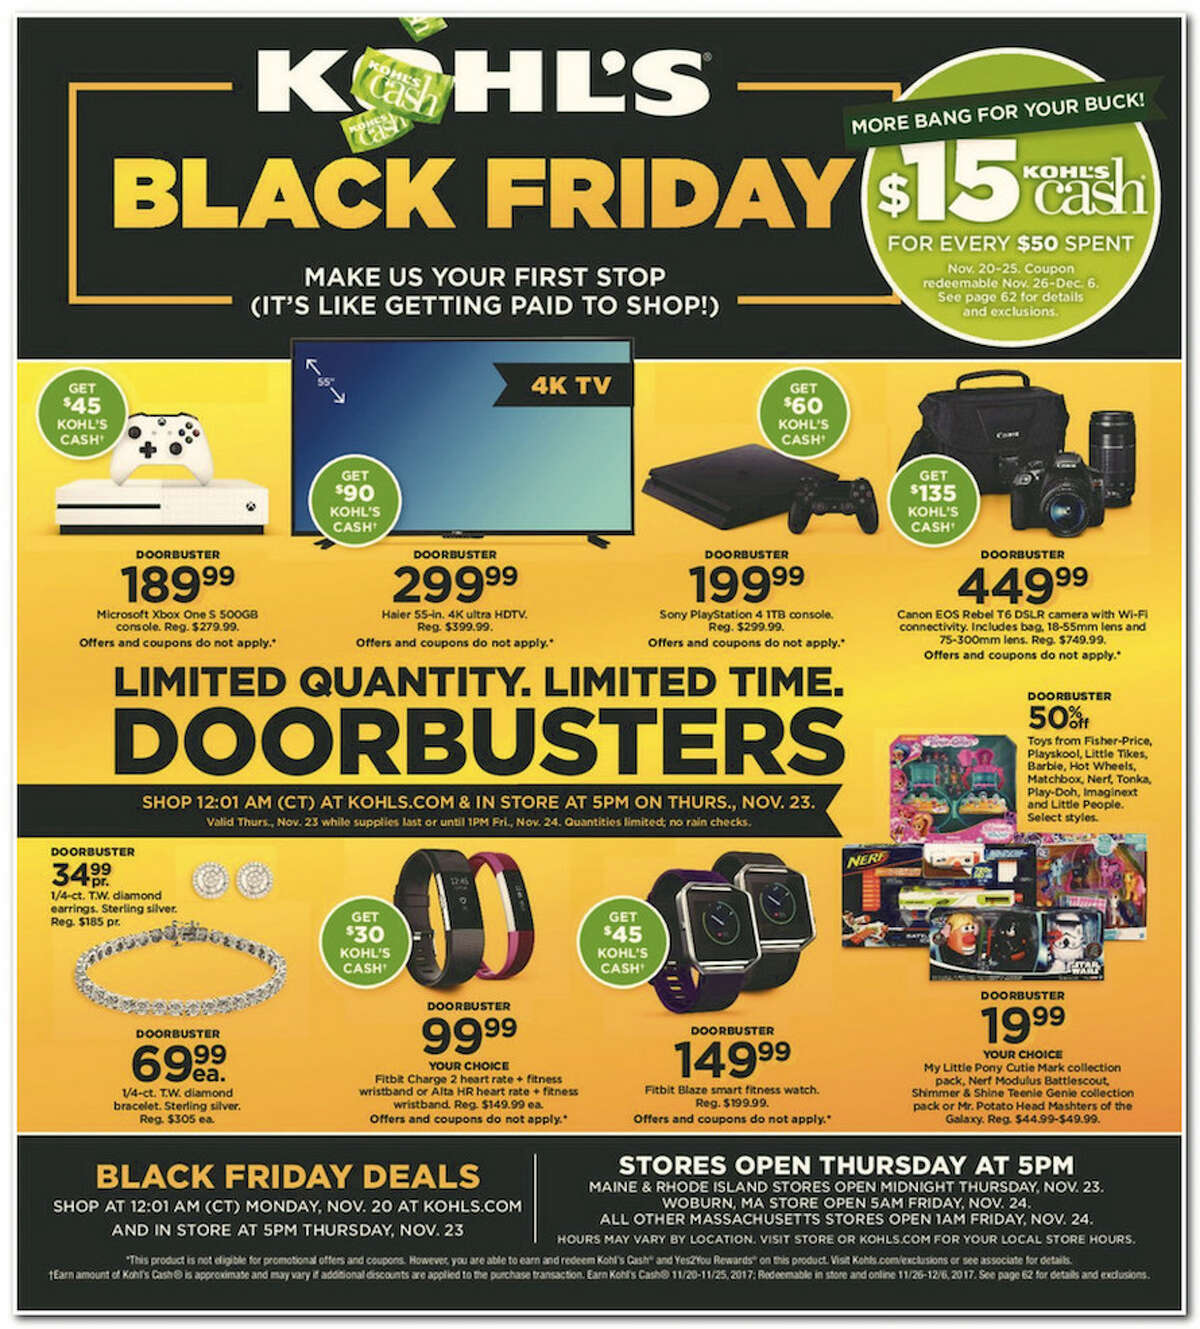 Kohl's has released its 64-page 2017 Black Friday Doorbuster ad. Prices and promotion are valid Thursday, Nov. 23 at 5 p.m. and are subject to change and availability, based on the retailer's determination.